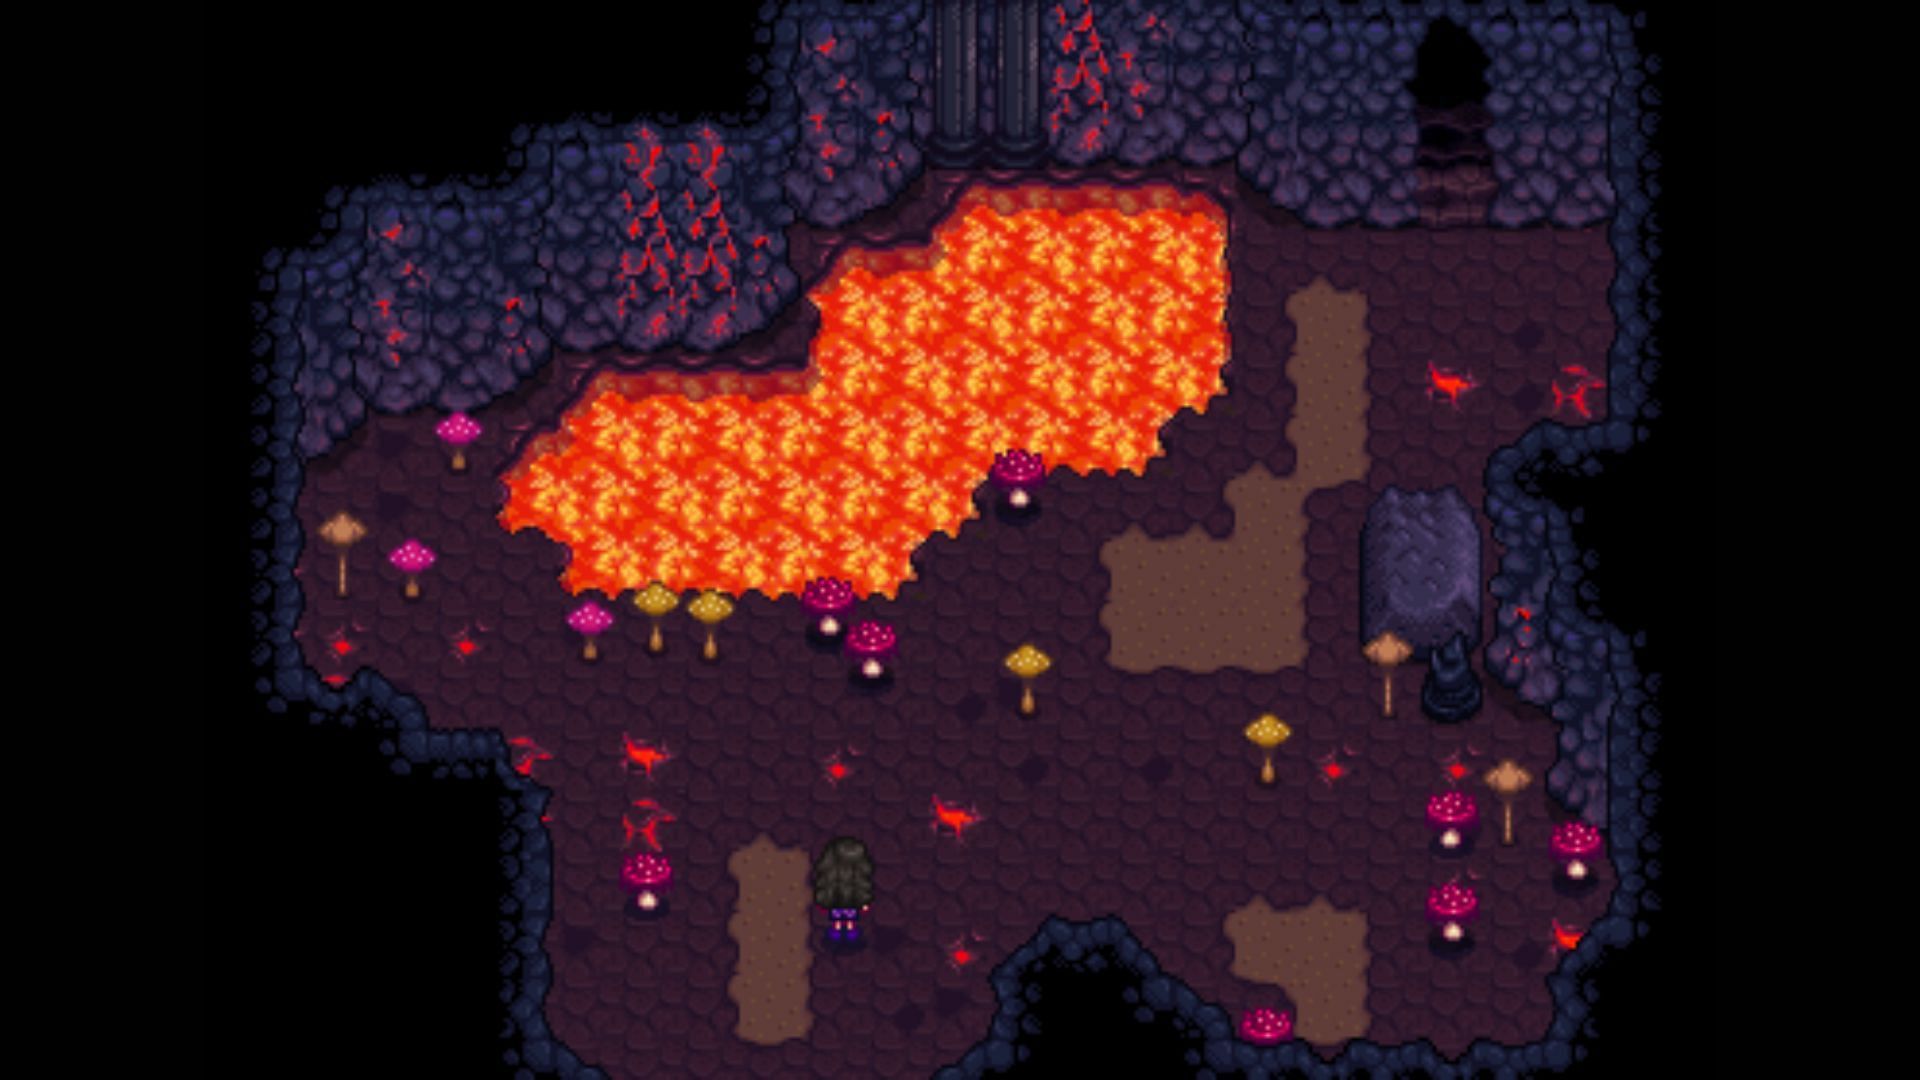 Forge can be unlocked at level 10 of Volcano Dungeon. (Image via ConcernedApe)